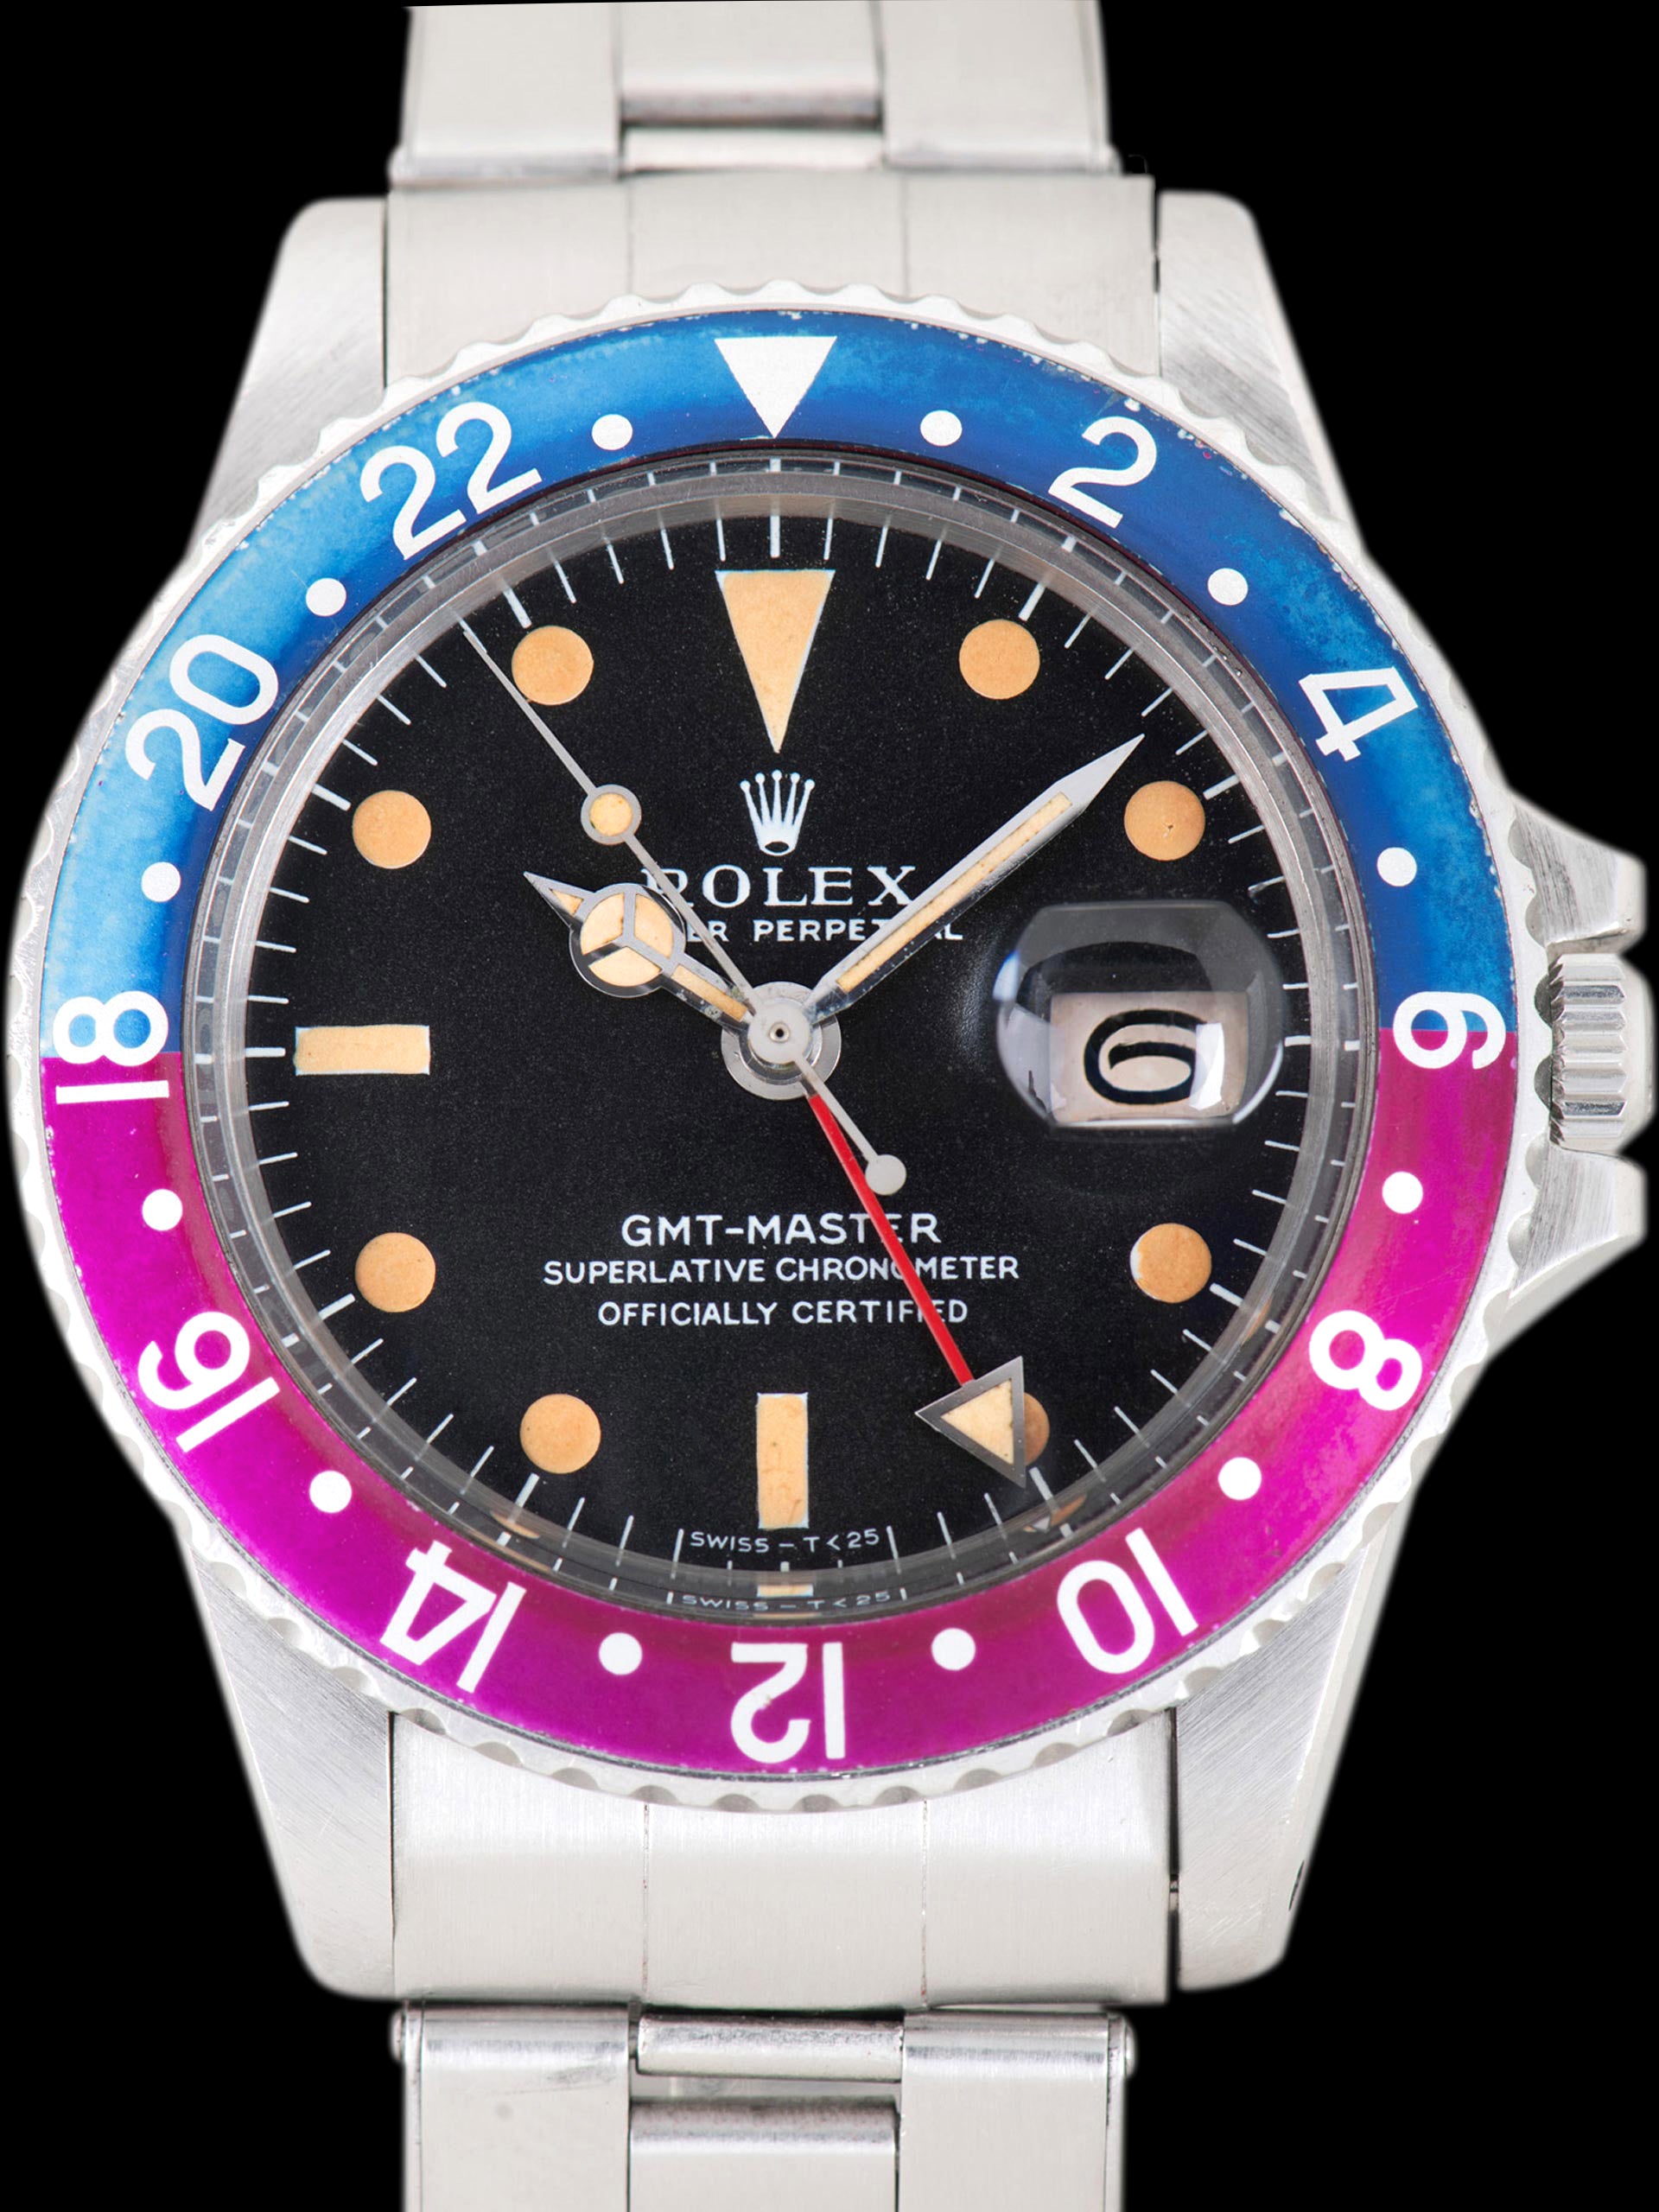 1968 Rolex GMT-Master (Ref. 1675) "Fuchsia" Mk I Pumpkin Patina Dial W/ Double Papers